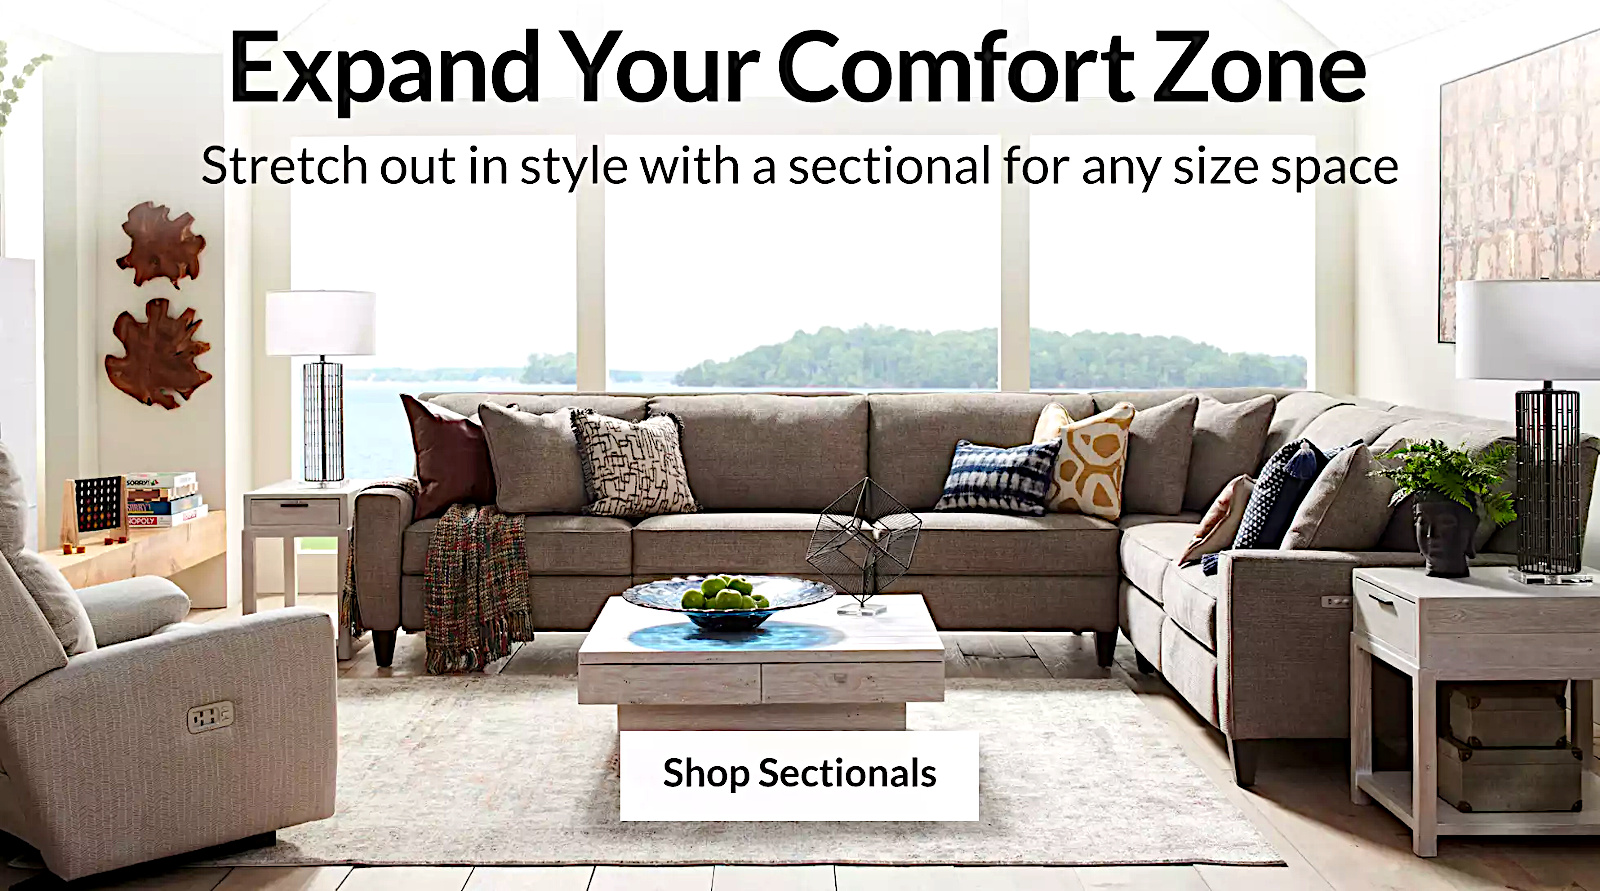 Expand your comfort zone discounts